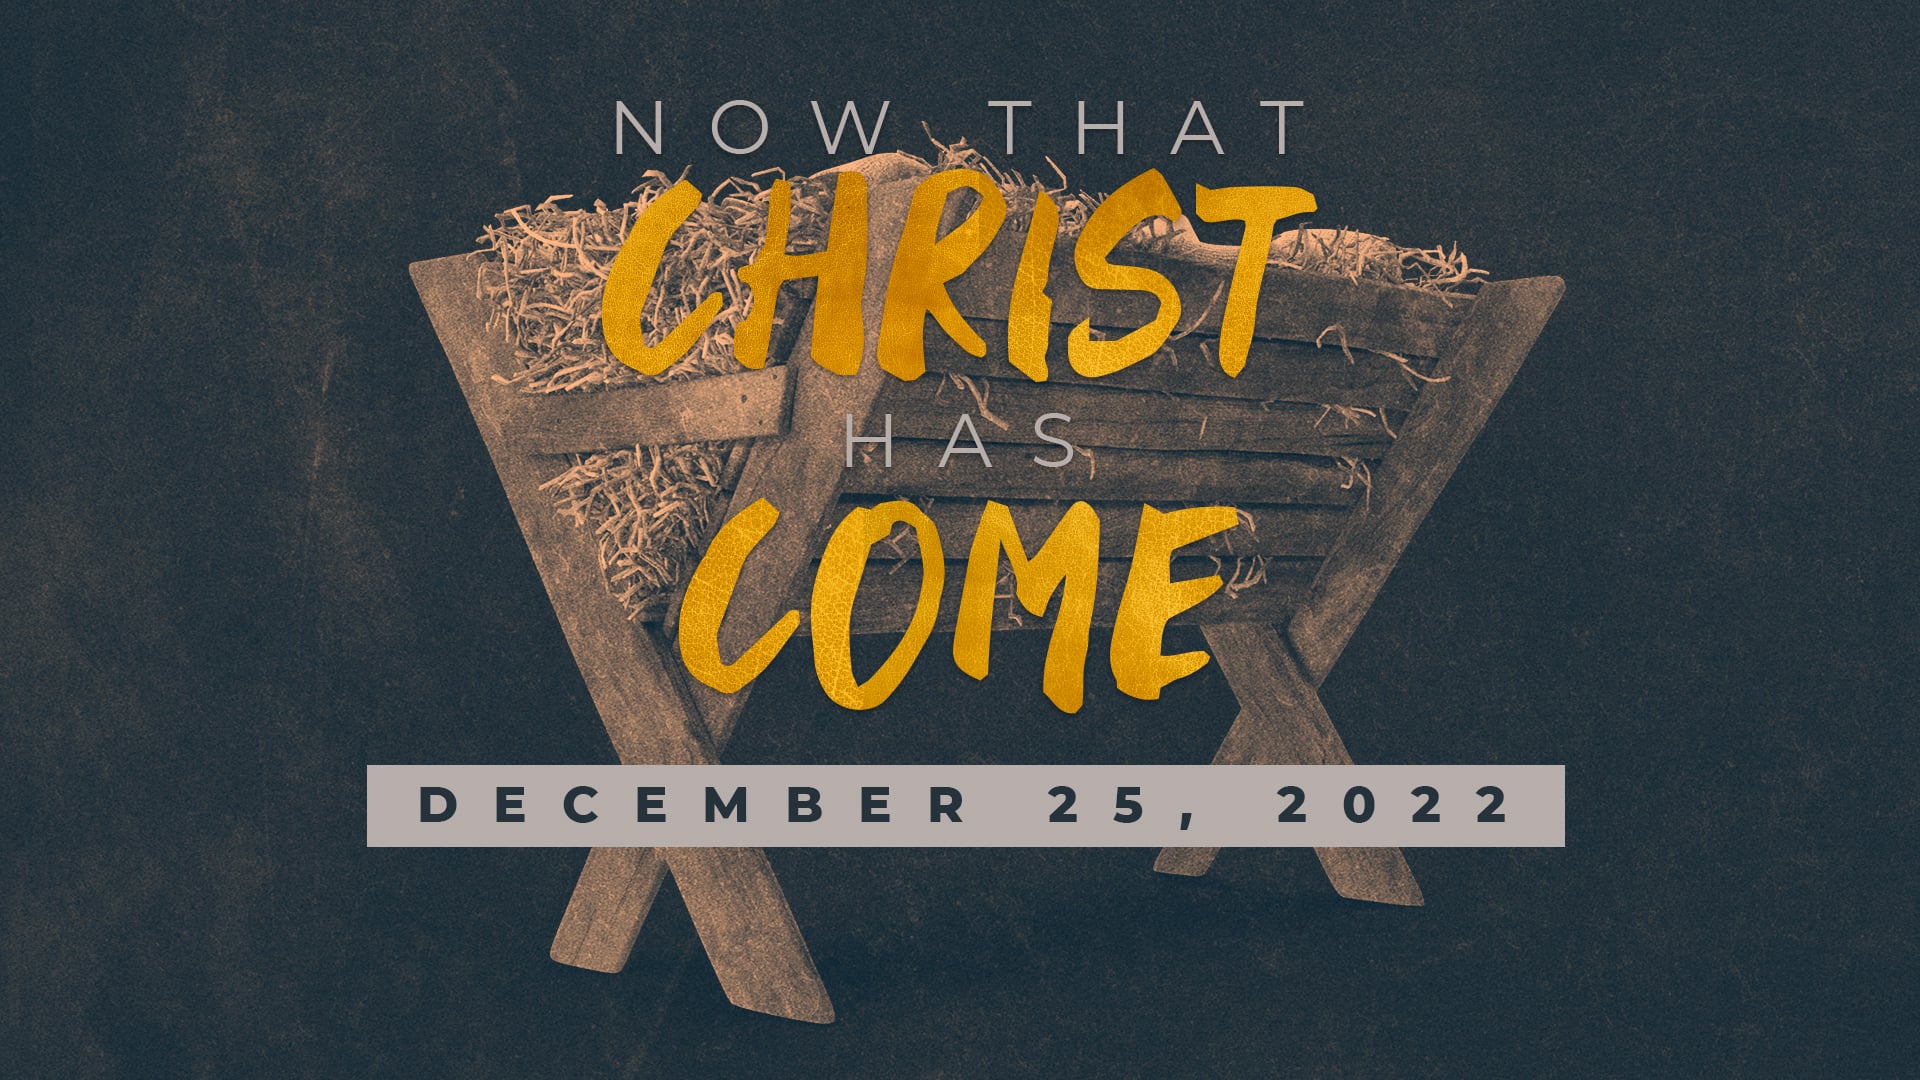 December 25, 2022 - Now That Christ Has Come